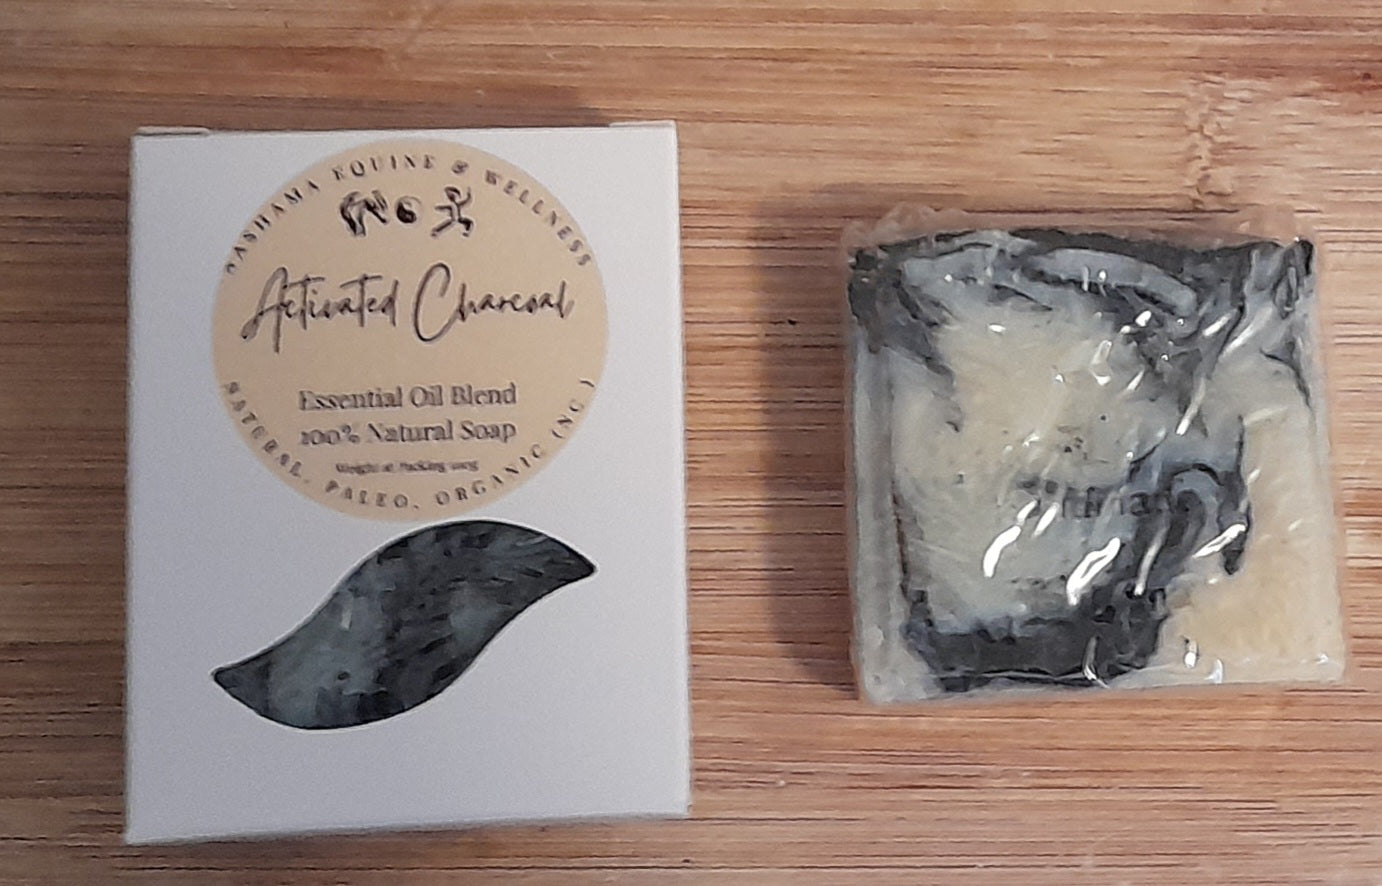 Activated Charcoal Unscented Soap